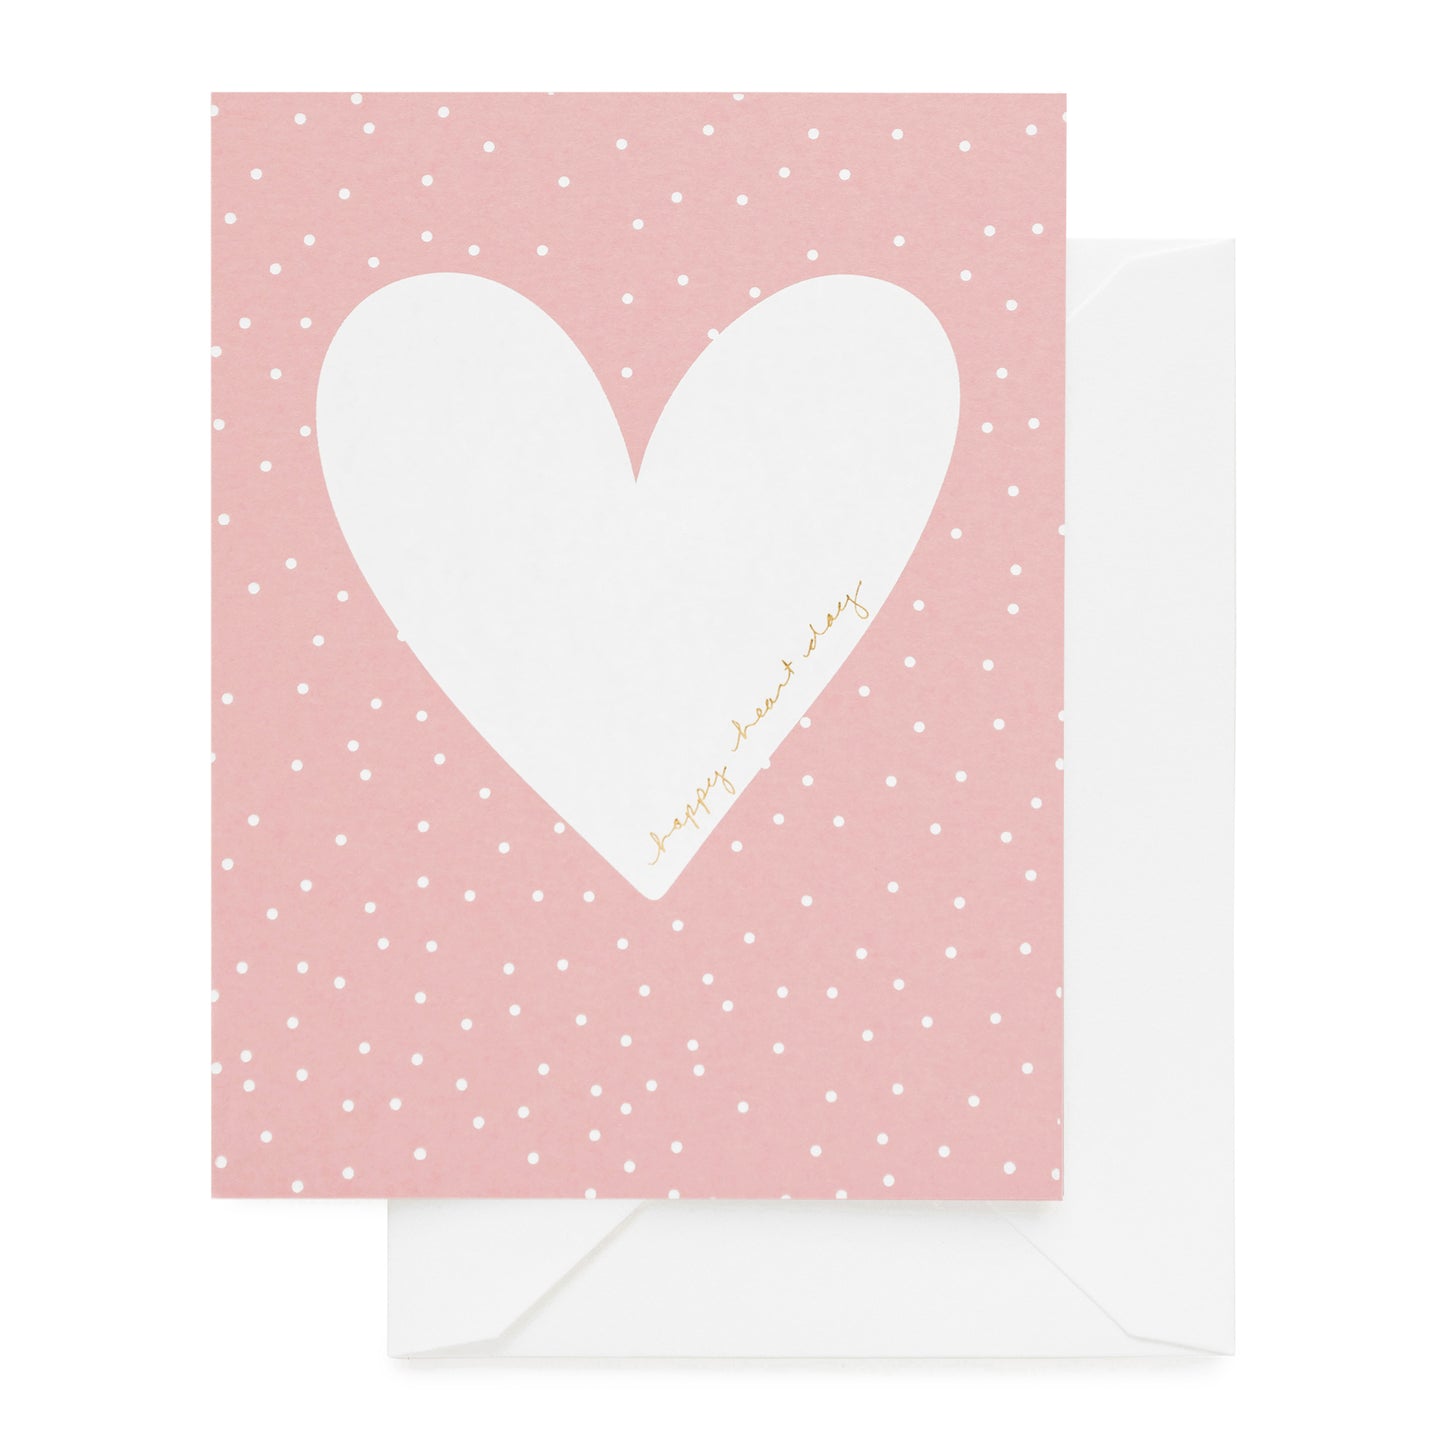 Dusty rose card with white heart and happy heart day printed